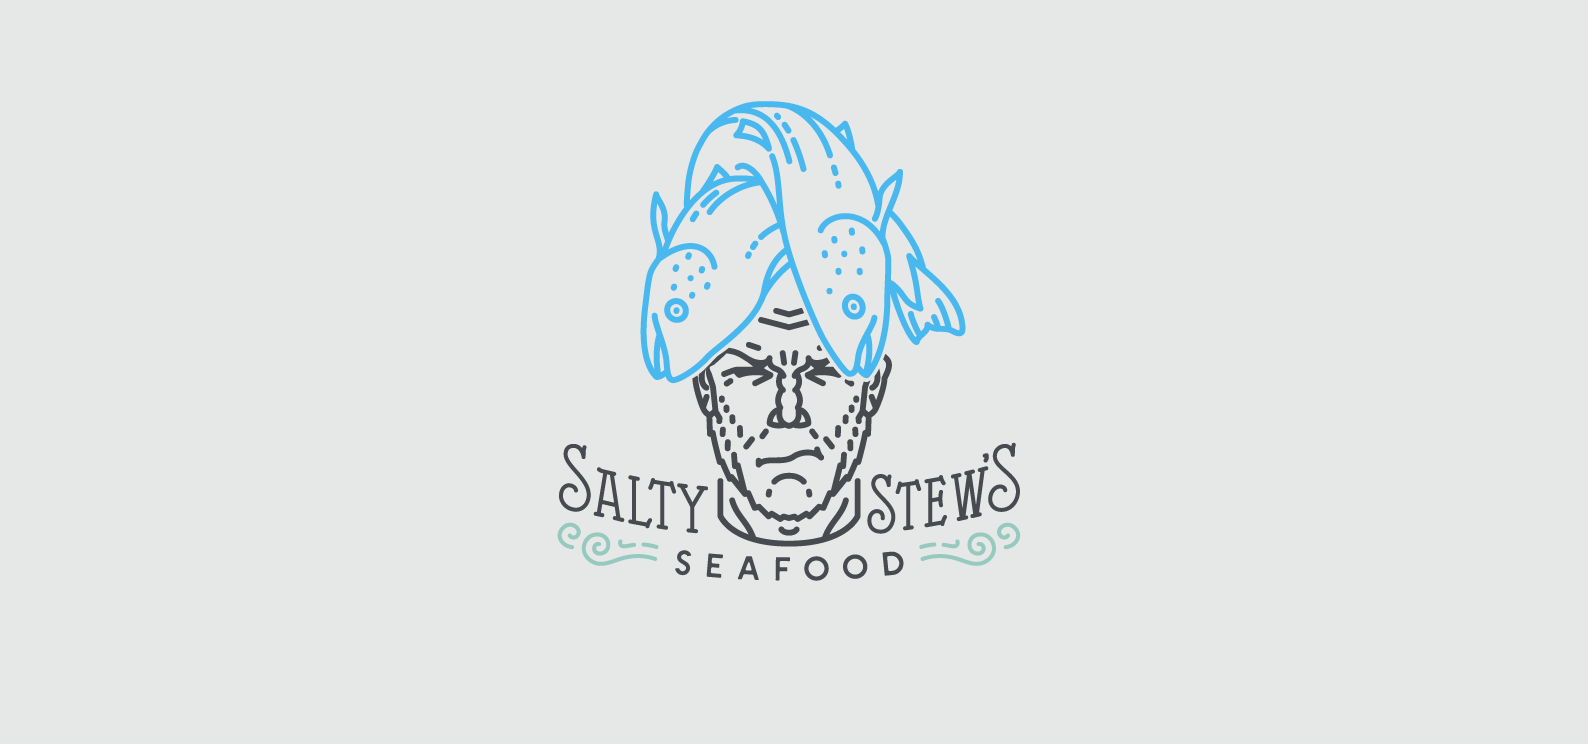 Lastly, another fish head logo